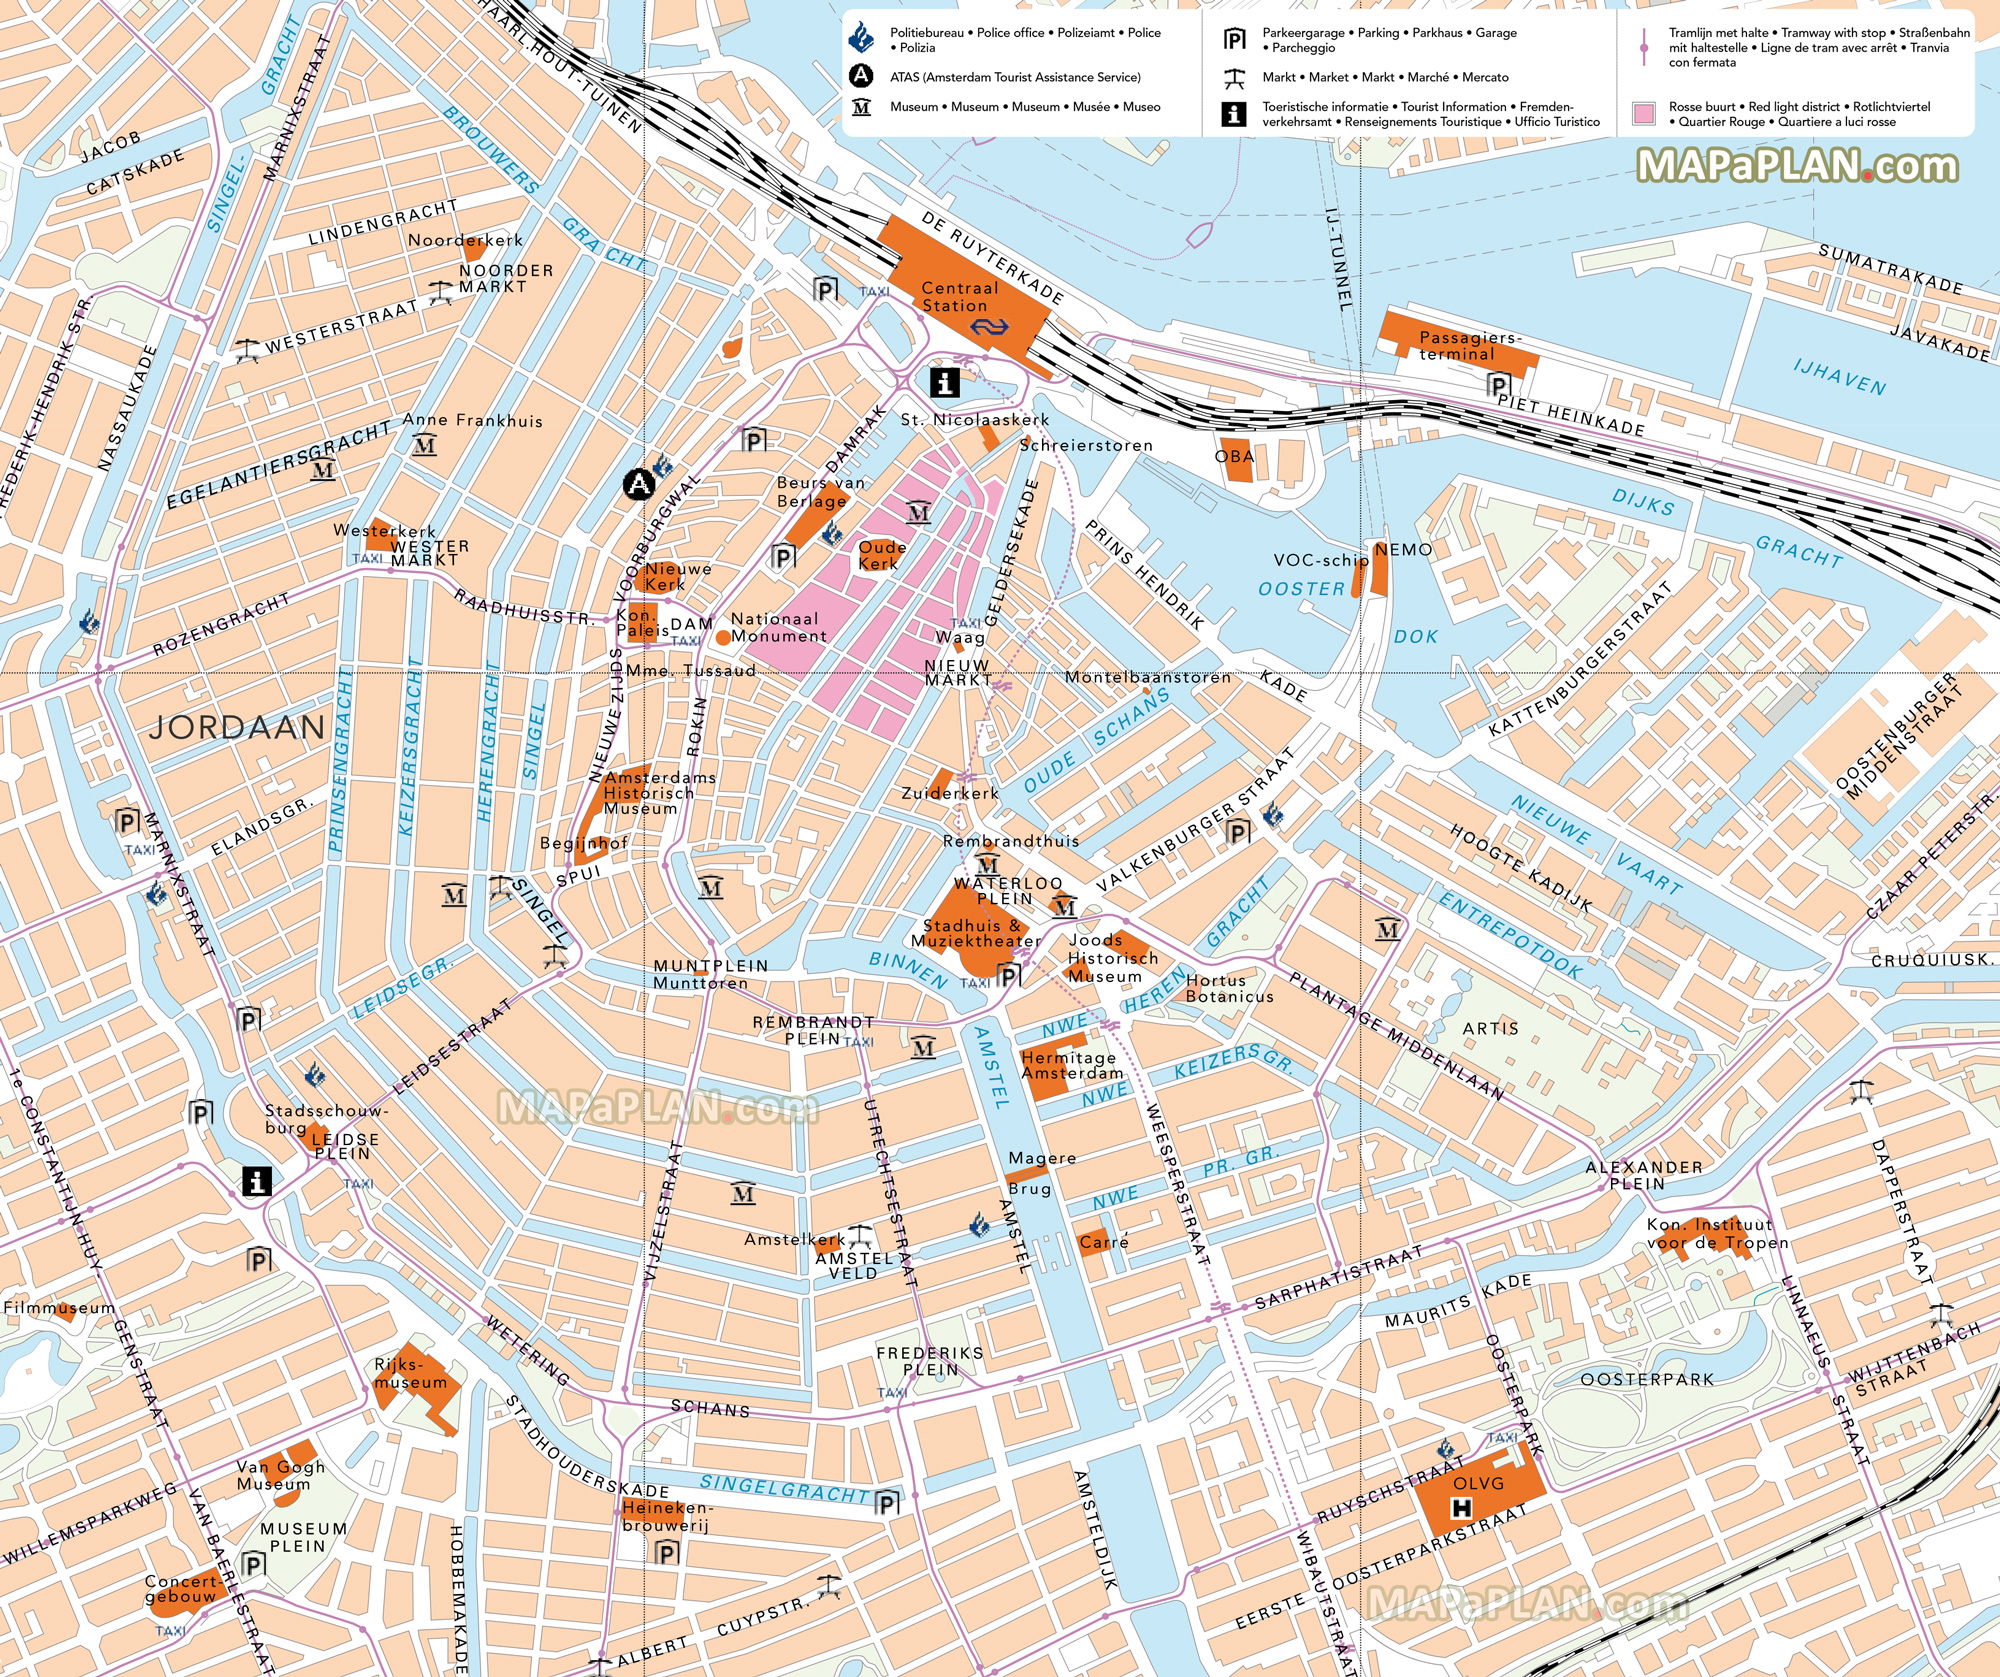 Red Light District location map best tourist attractions Amsterdam top tourist attractions map